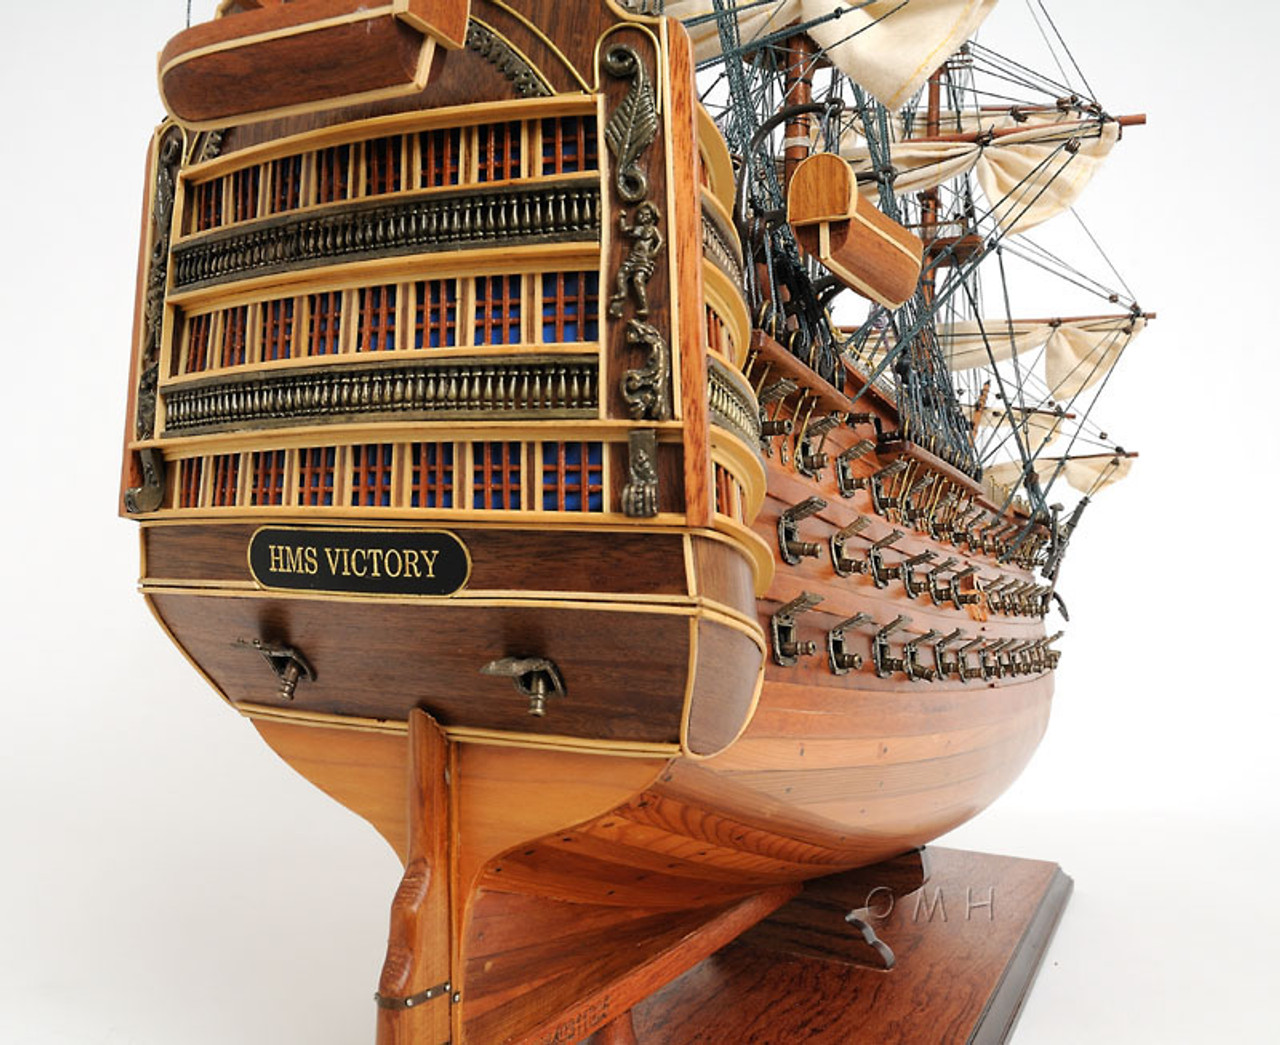 HMS Victory Wooden Model Lord Nelson's Flagship